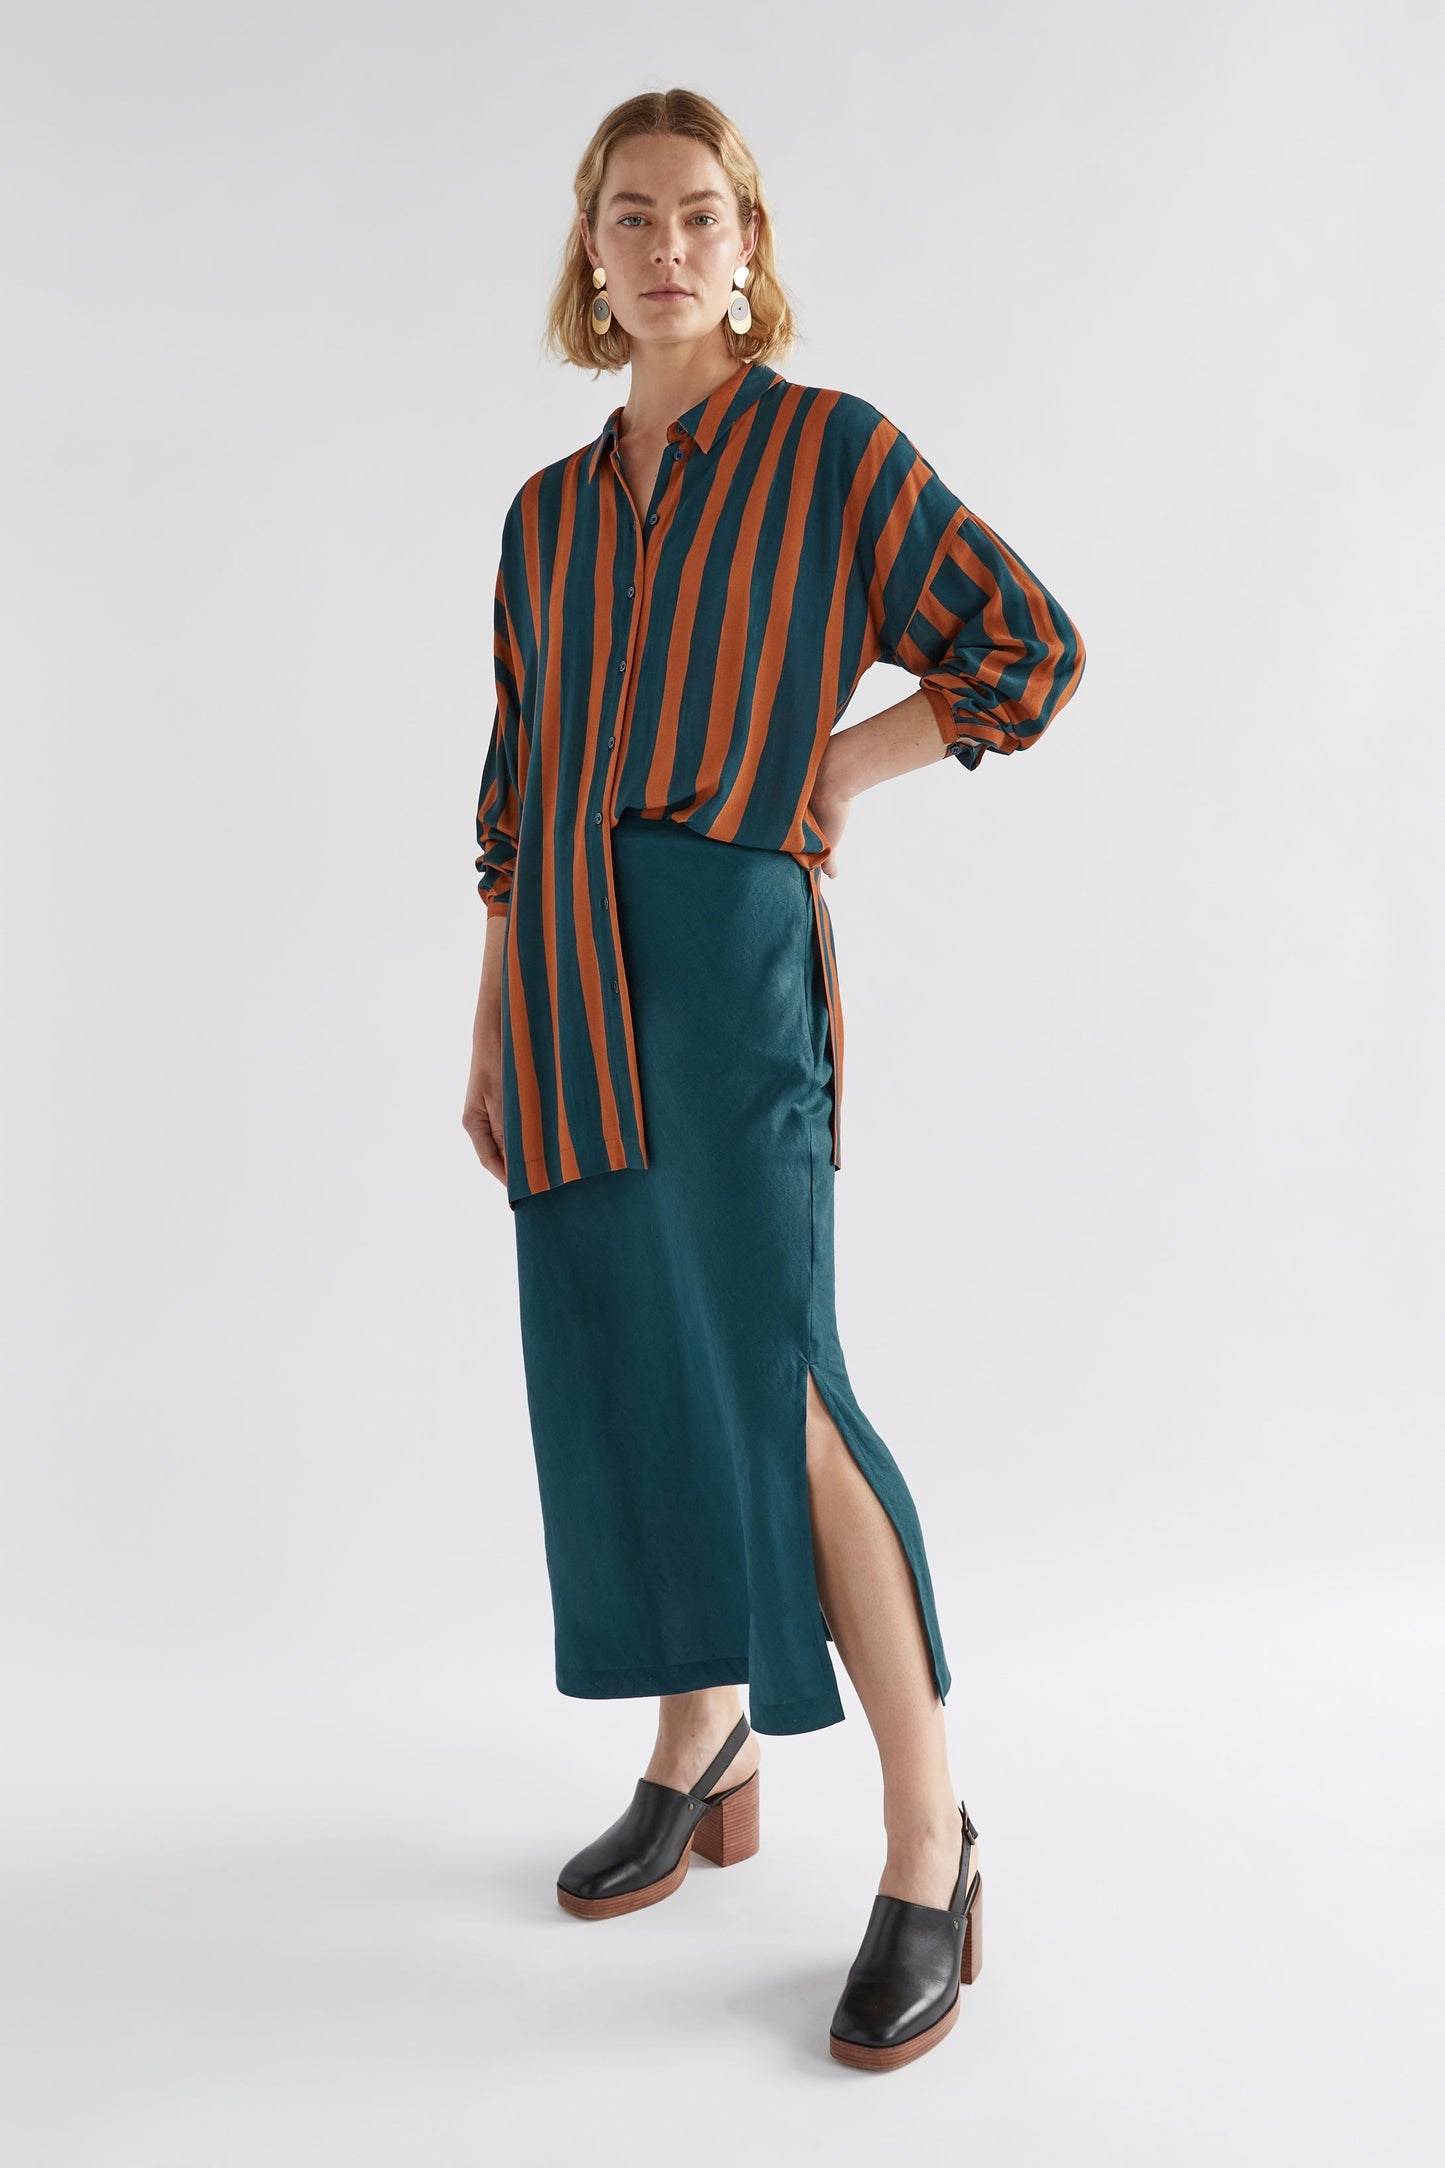 Tilbe Silky Striped Long Shirt Model angled front | BRONZE TEAL PAINT STRIPE